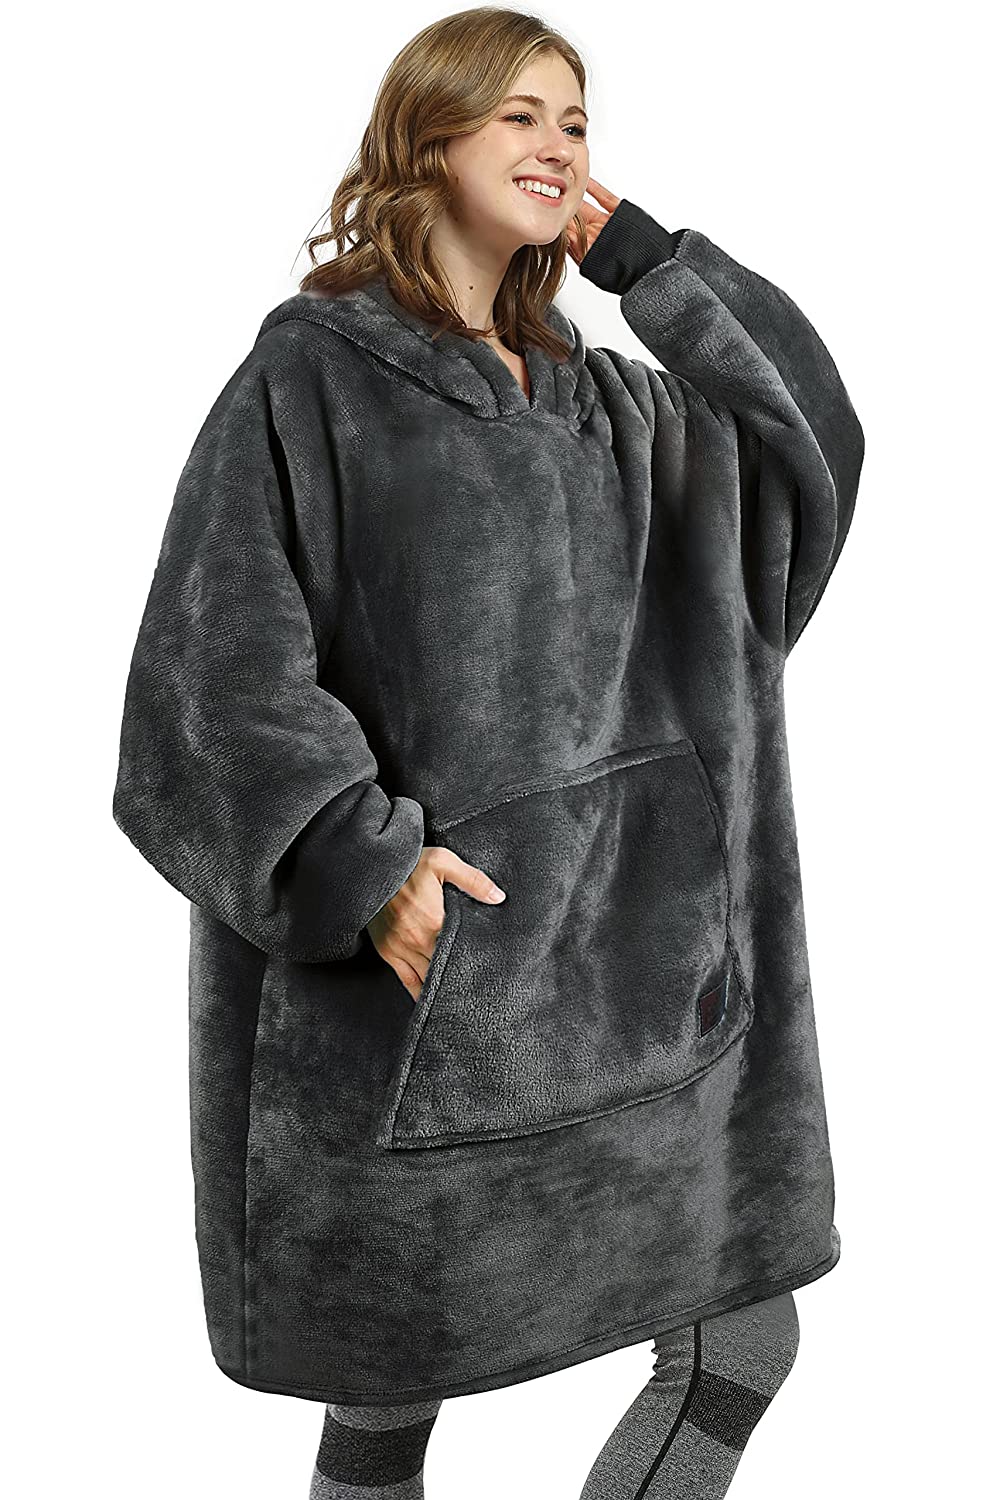 What to know about buying a Hoodie? post thumbnail image